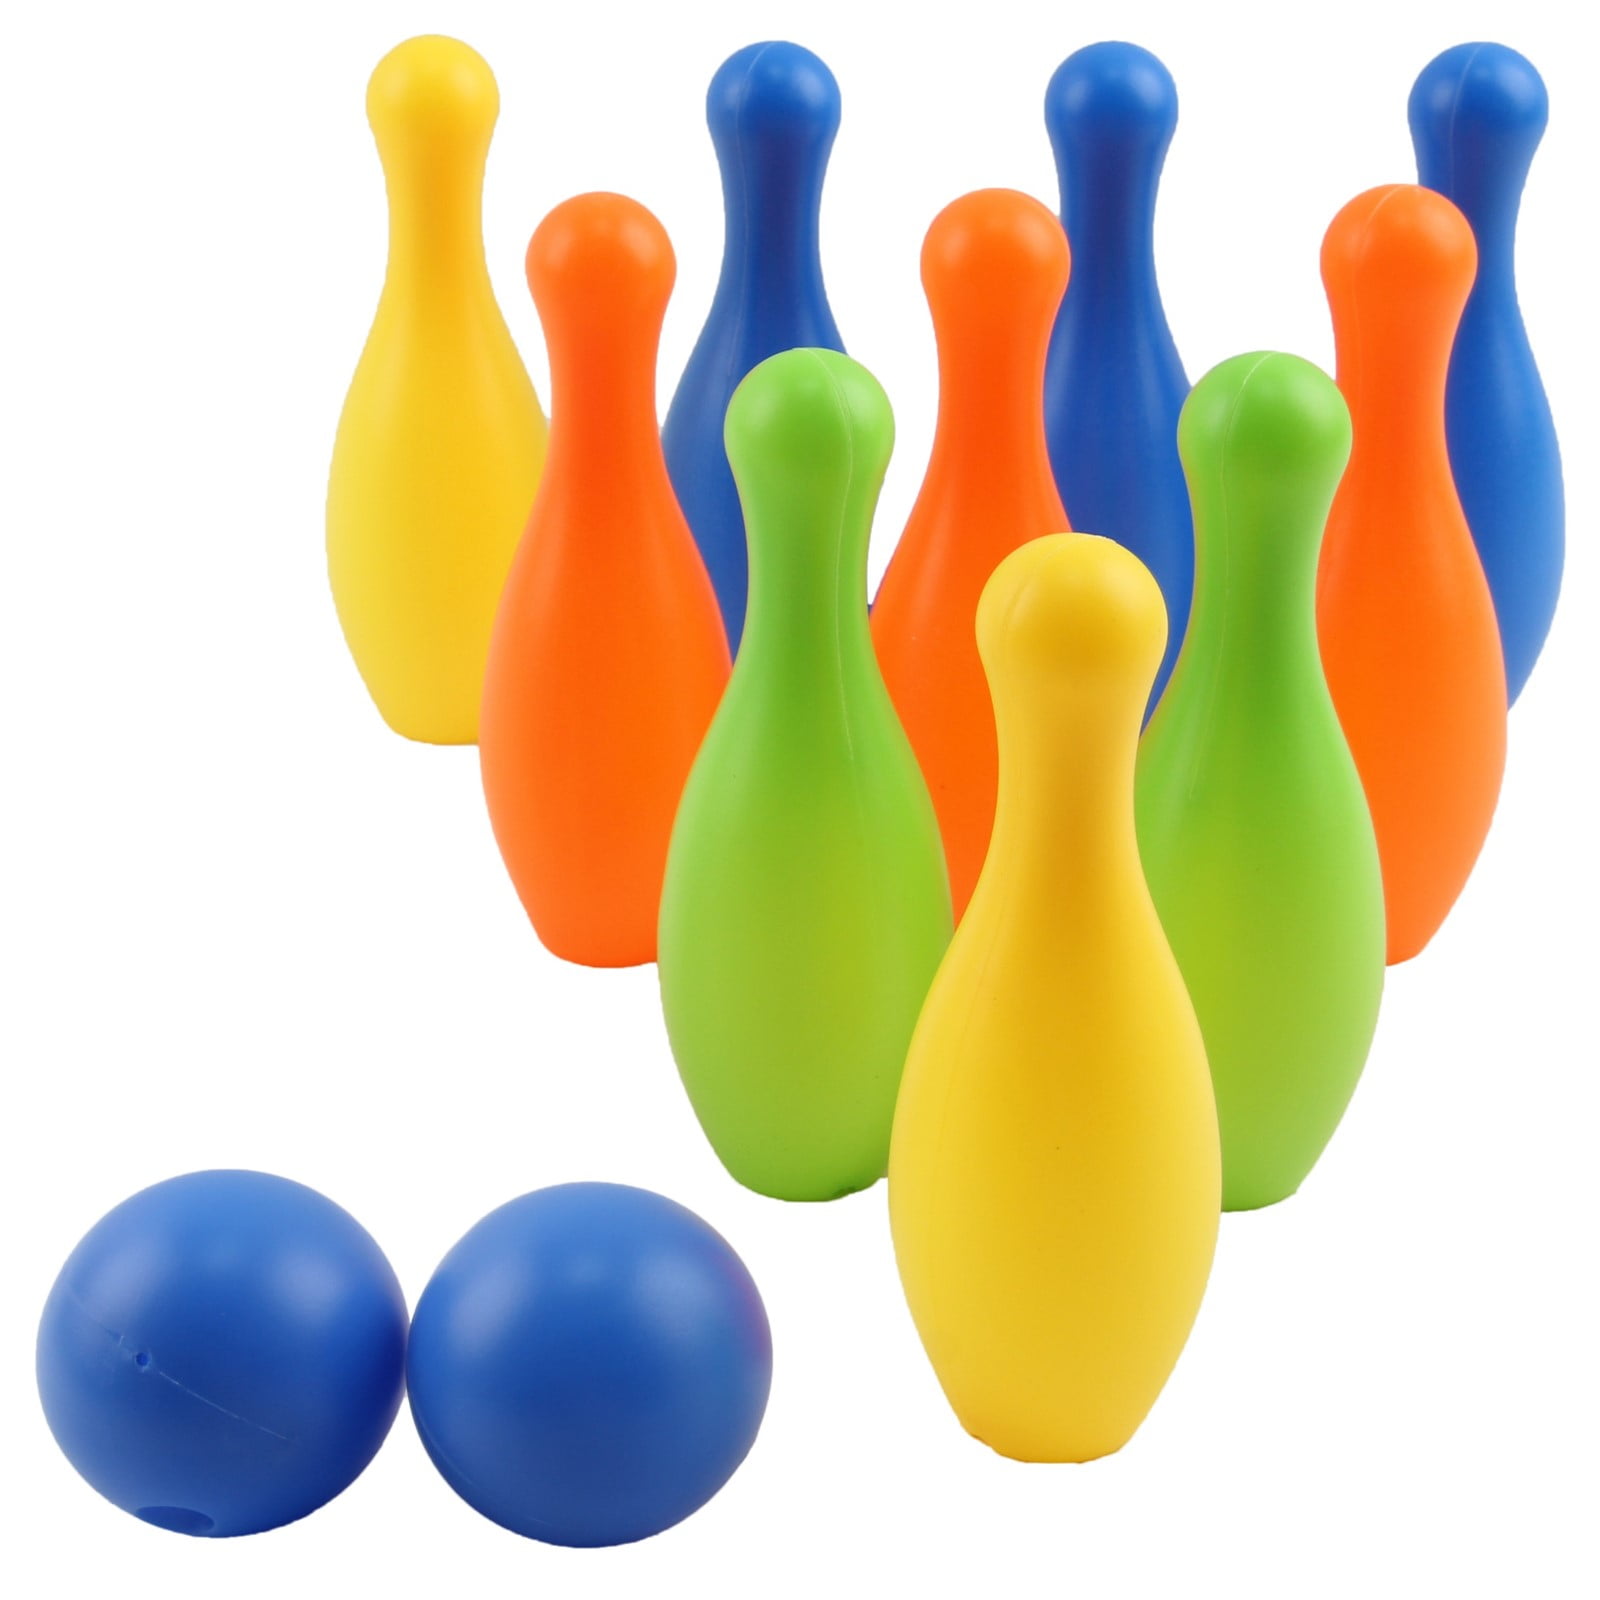 6 Colorful Bowling Pins Plus 1 Sturdy Kids’ Bowling Ball with 3 Holes that Fit Little Fingers Thin Air Toys Kids’ Bowling Set for Ages 3 & Up Each 9.5 Inches Tall All in 1 Giftable Box 